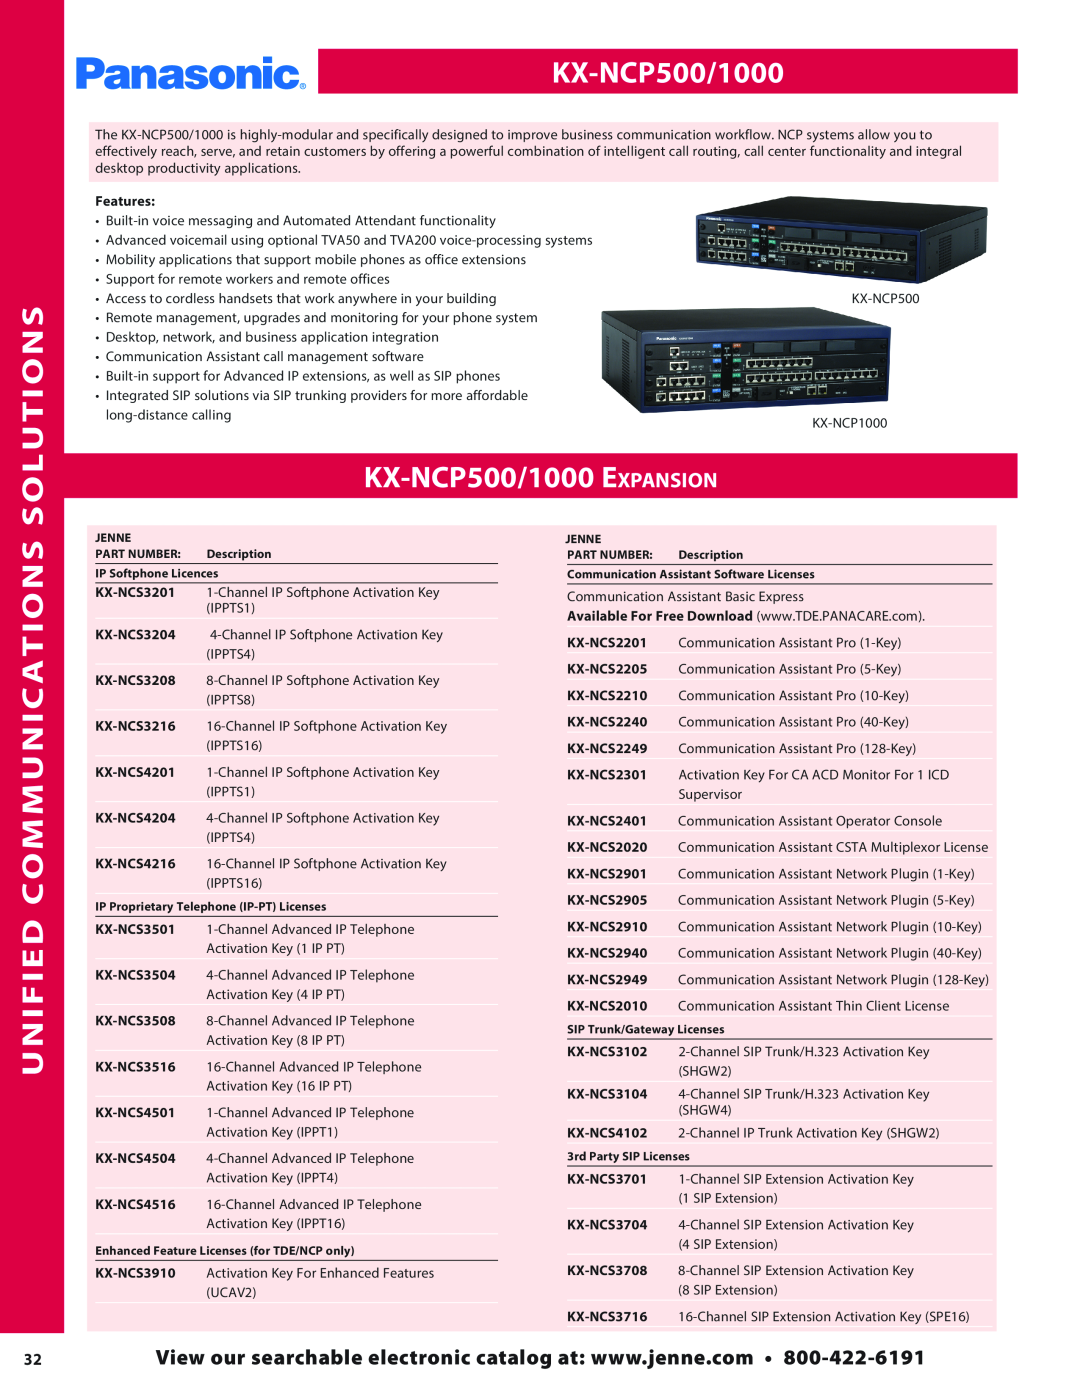 Panasonic PMPU2000 manual Solutions, Unified Communications, KX-NCP500/1000Expansion 